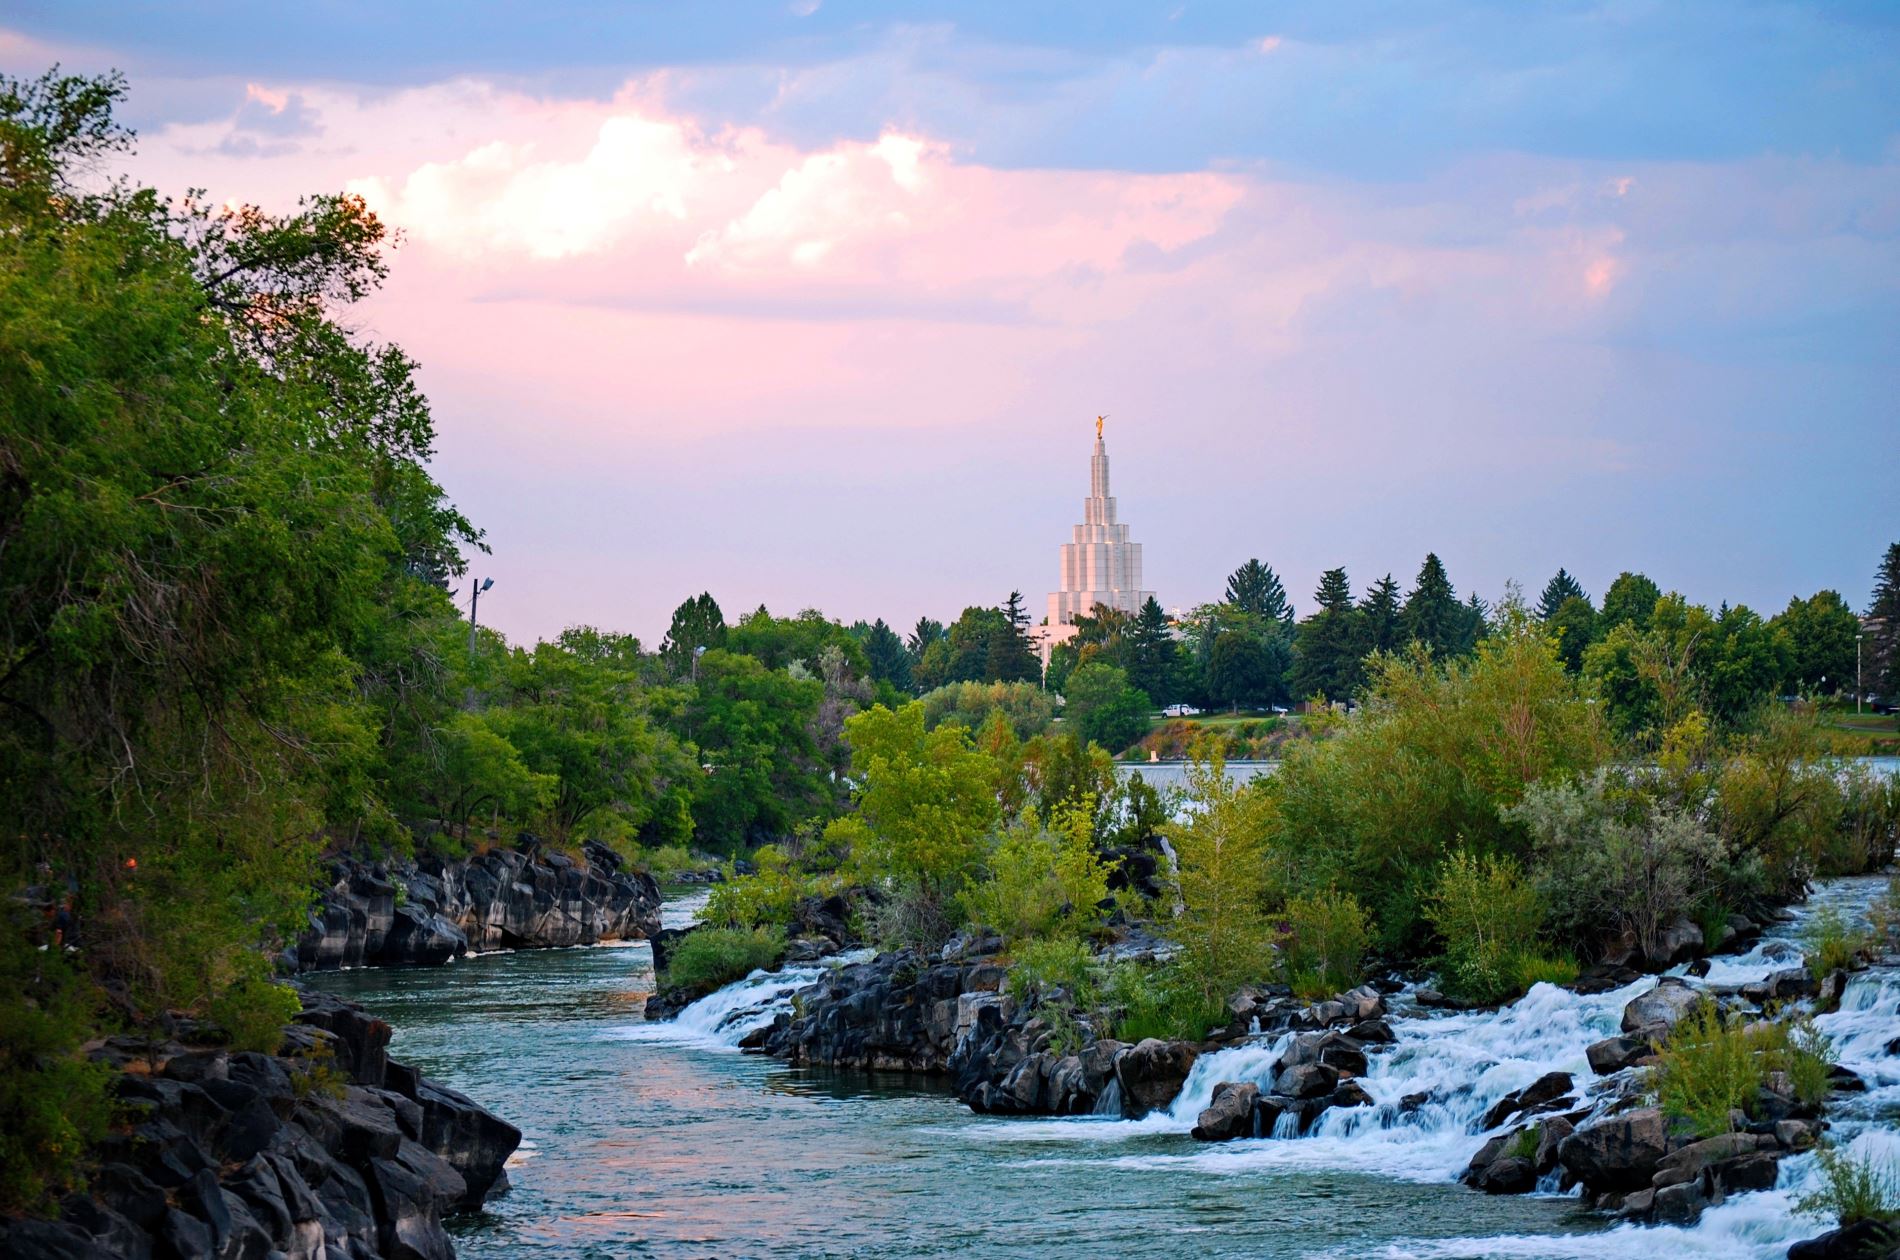 City is idaho falls and job category is other jobs